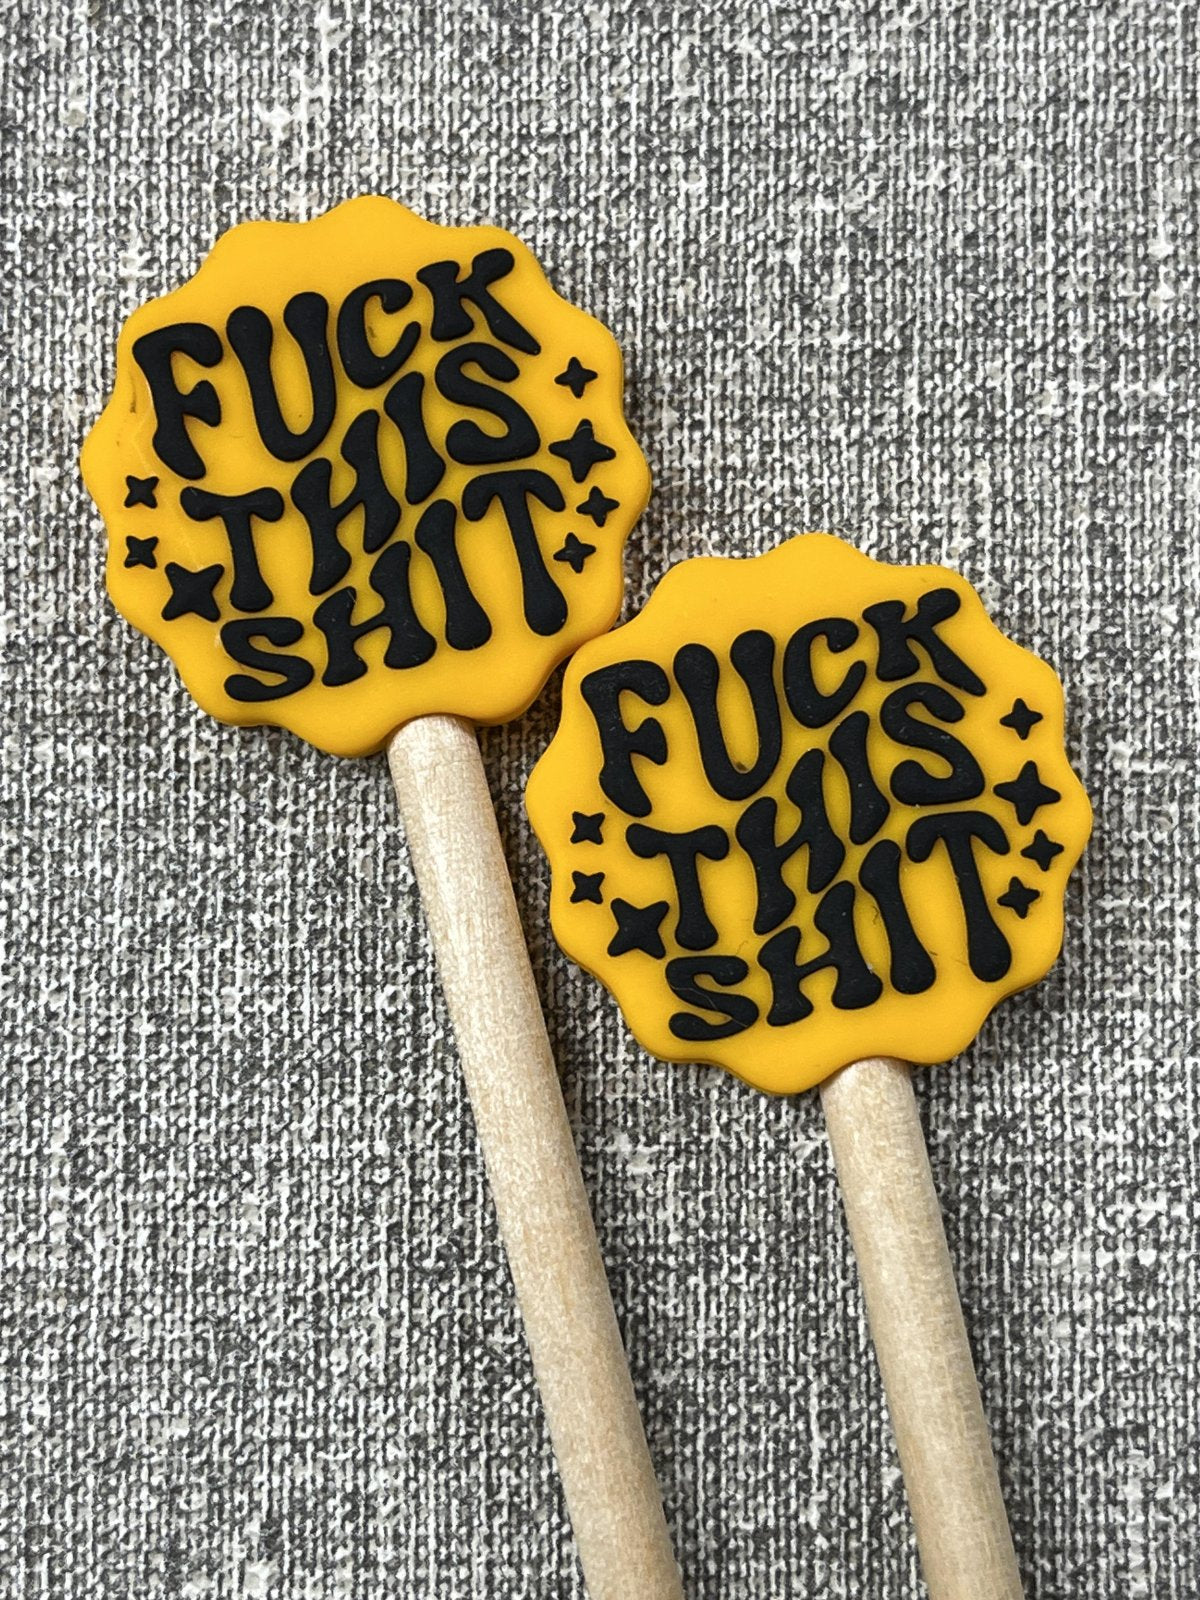 Minnie & Purl; Stitch Stoppers; Fuck this shit;